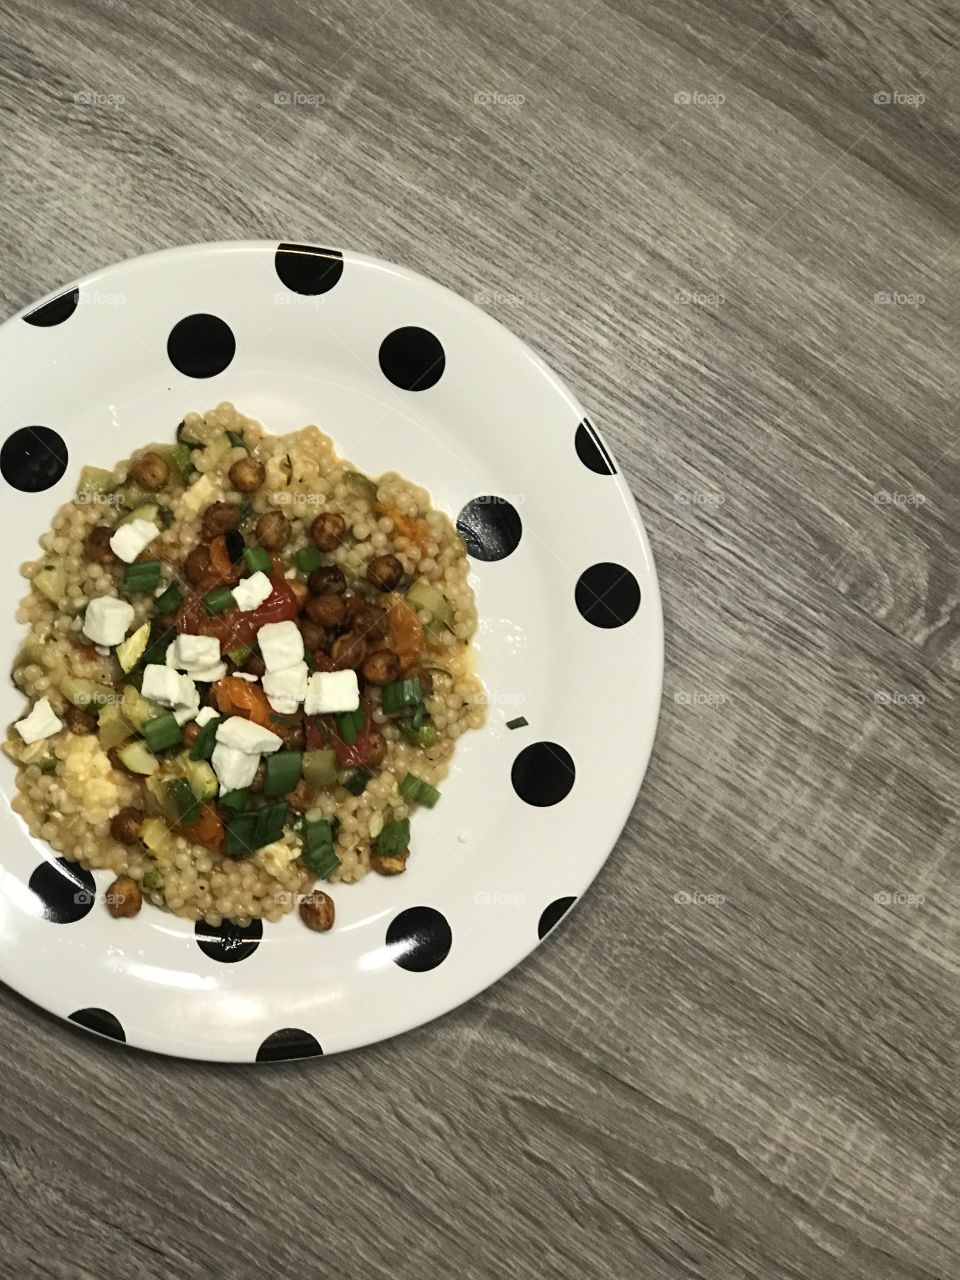 Couscous dish plates with cheese and vegetables